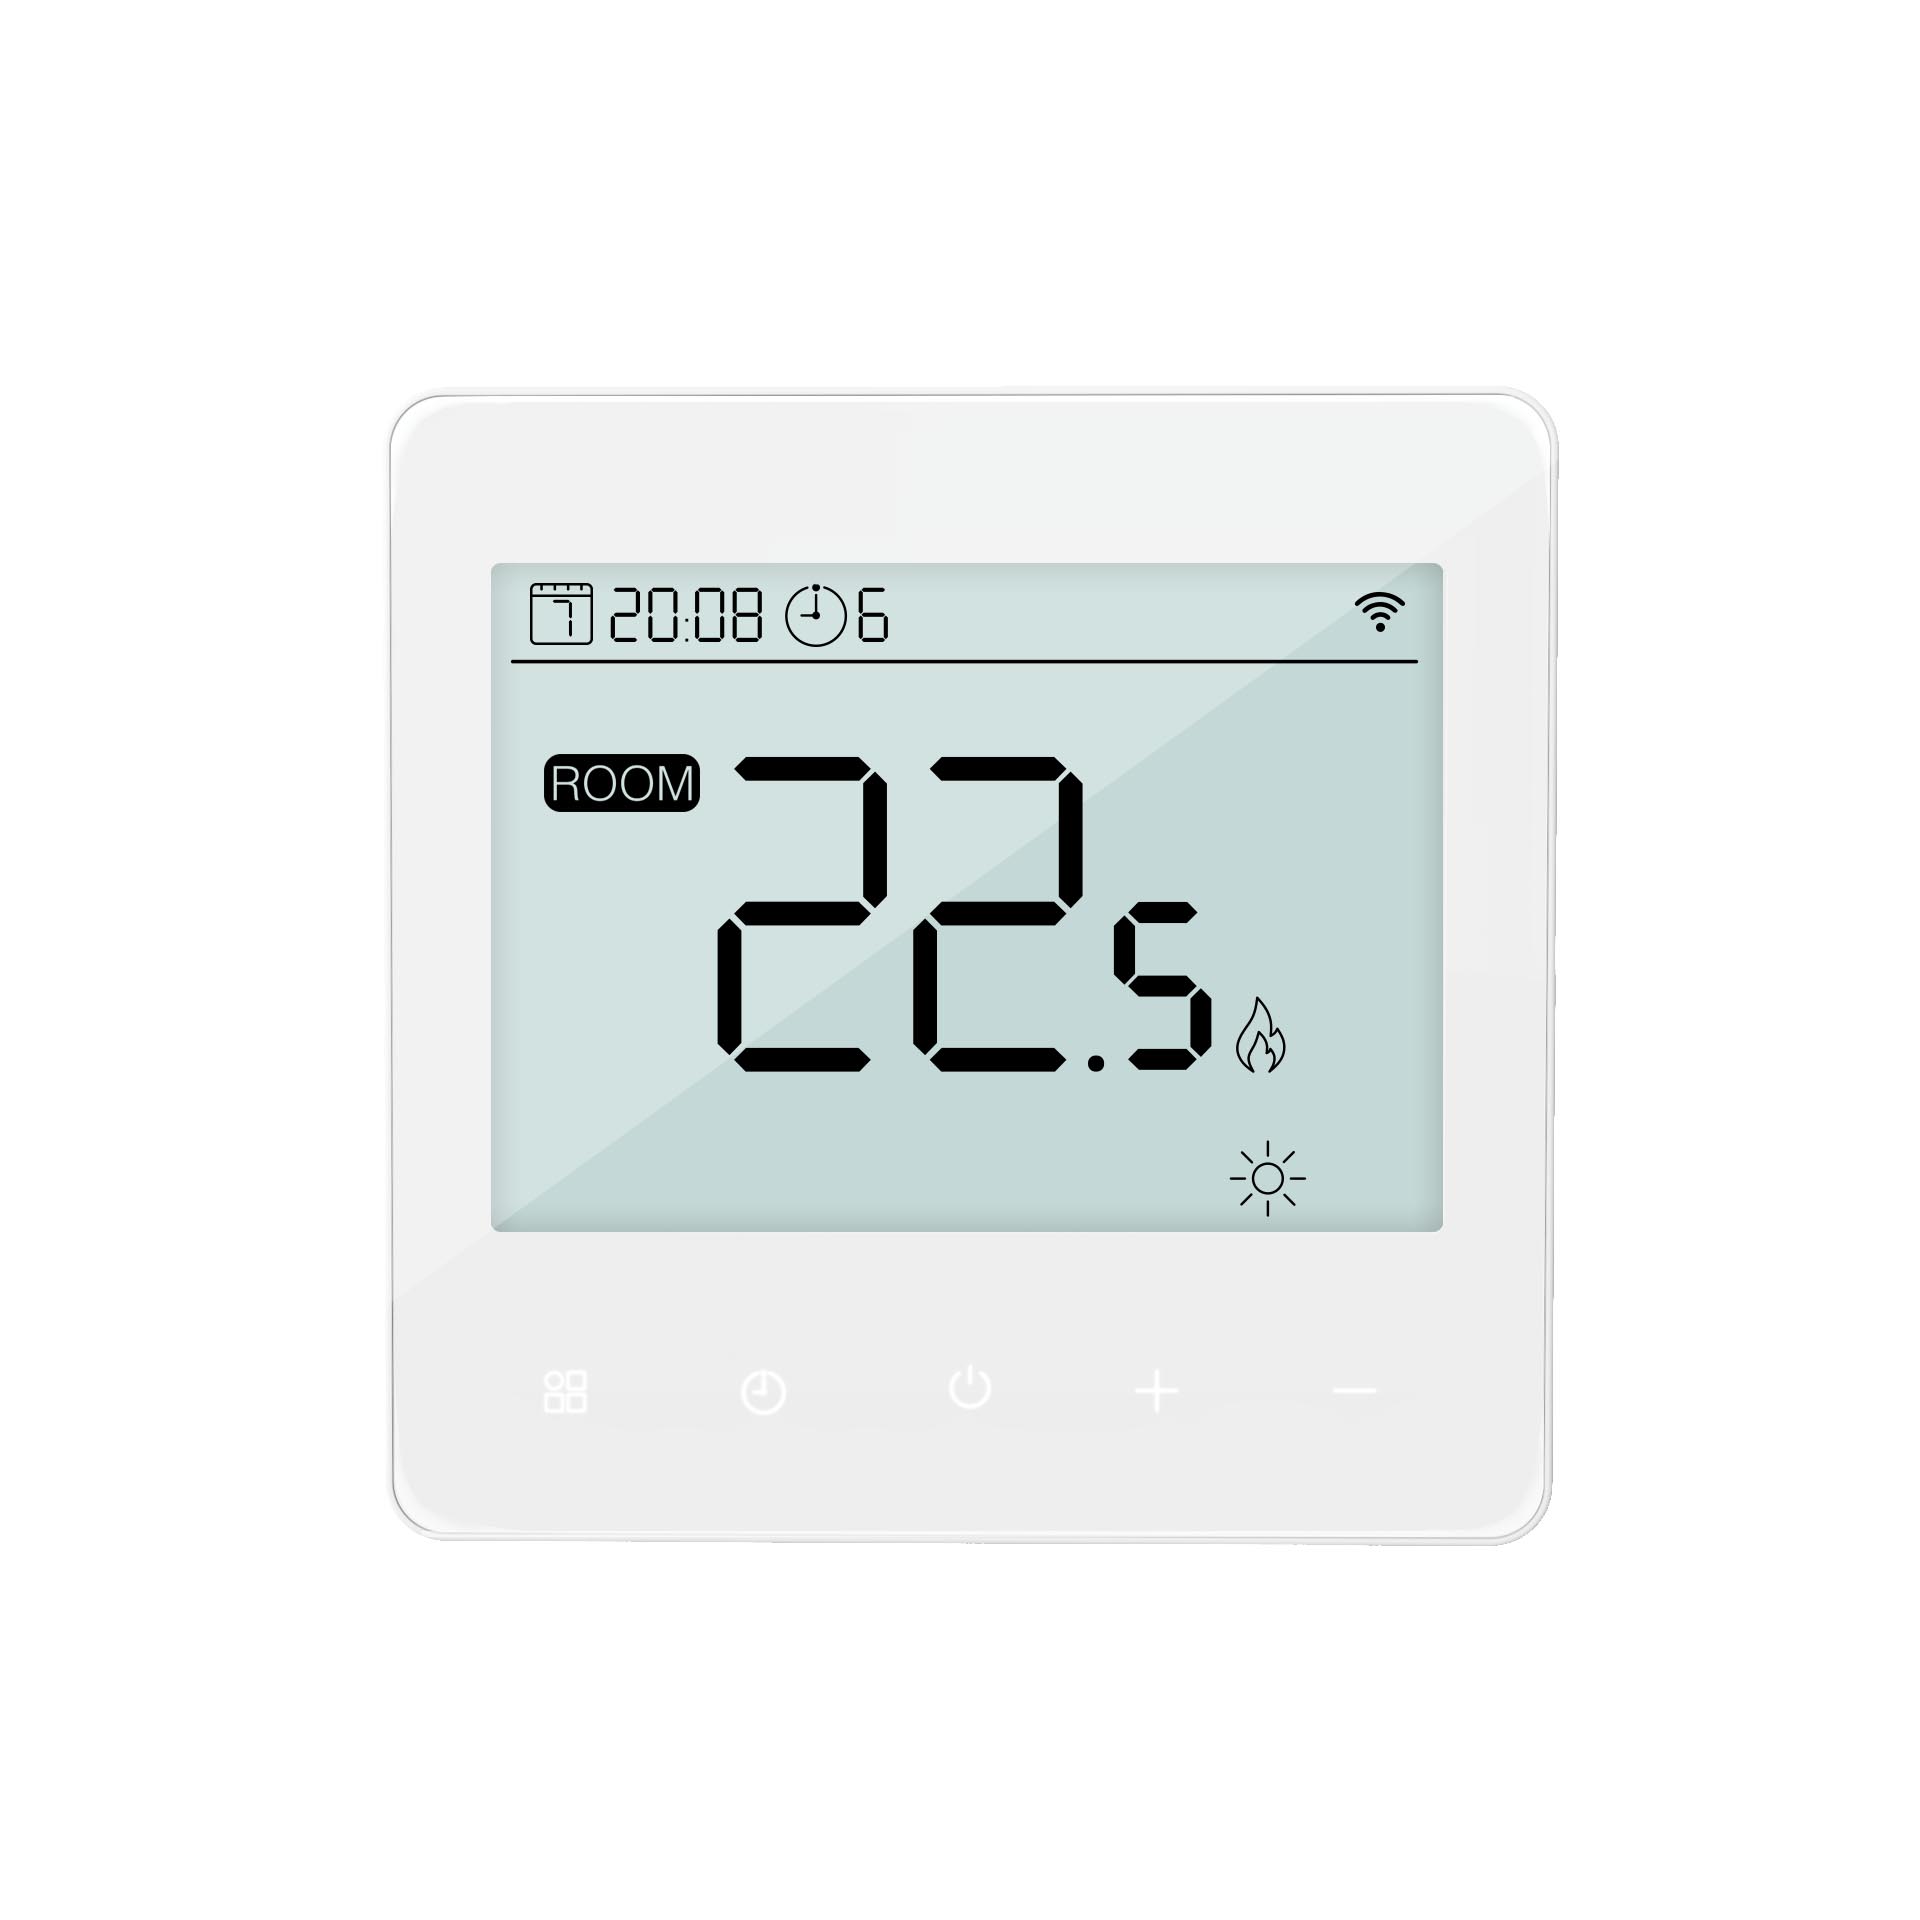 Touchscreen programmable thermostat